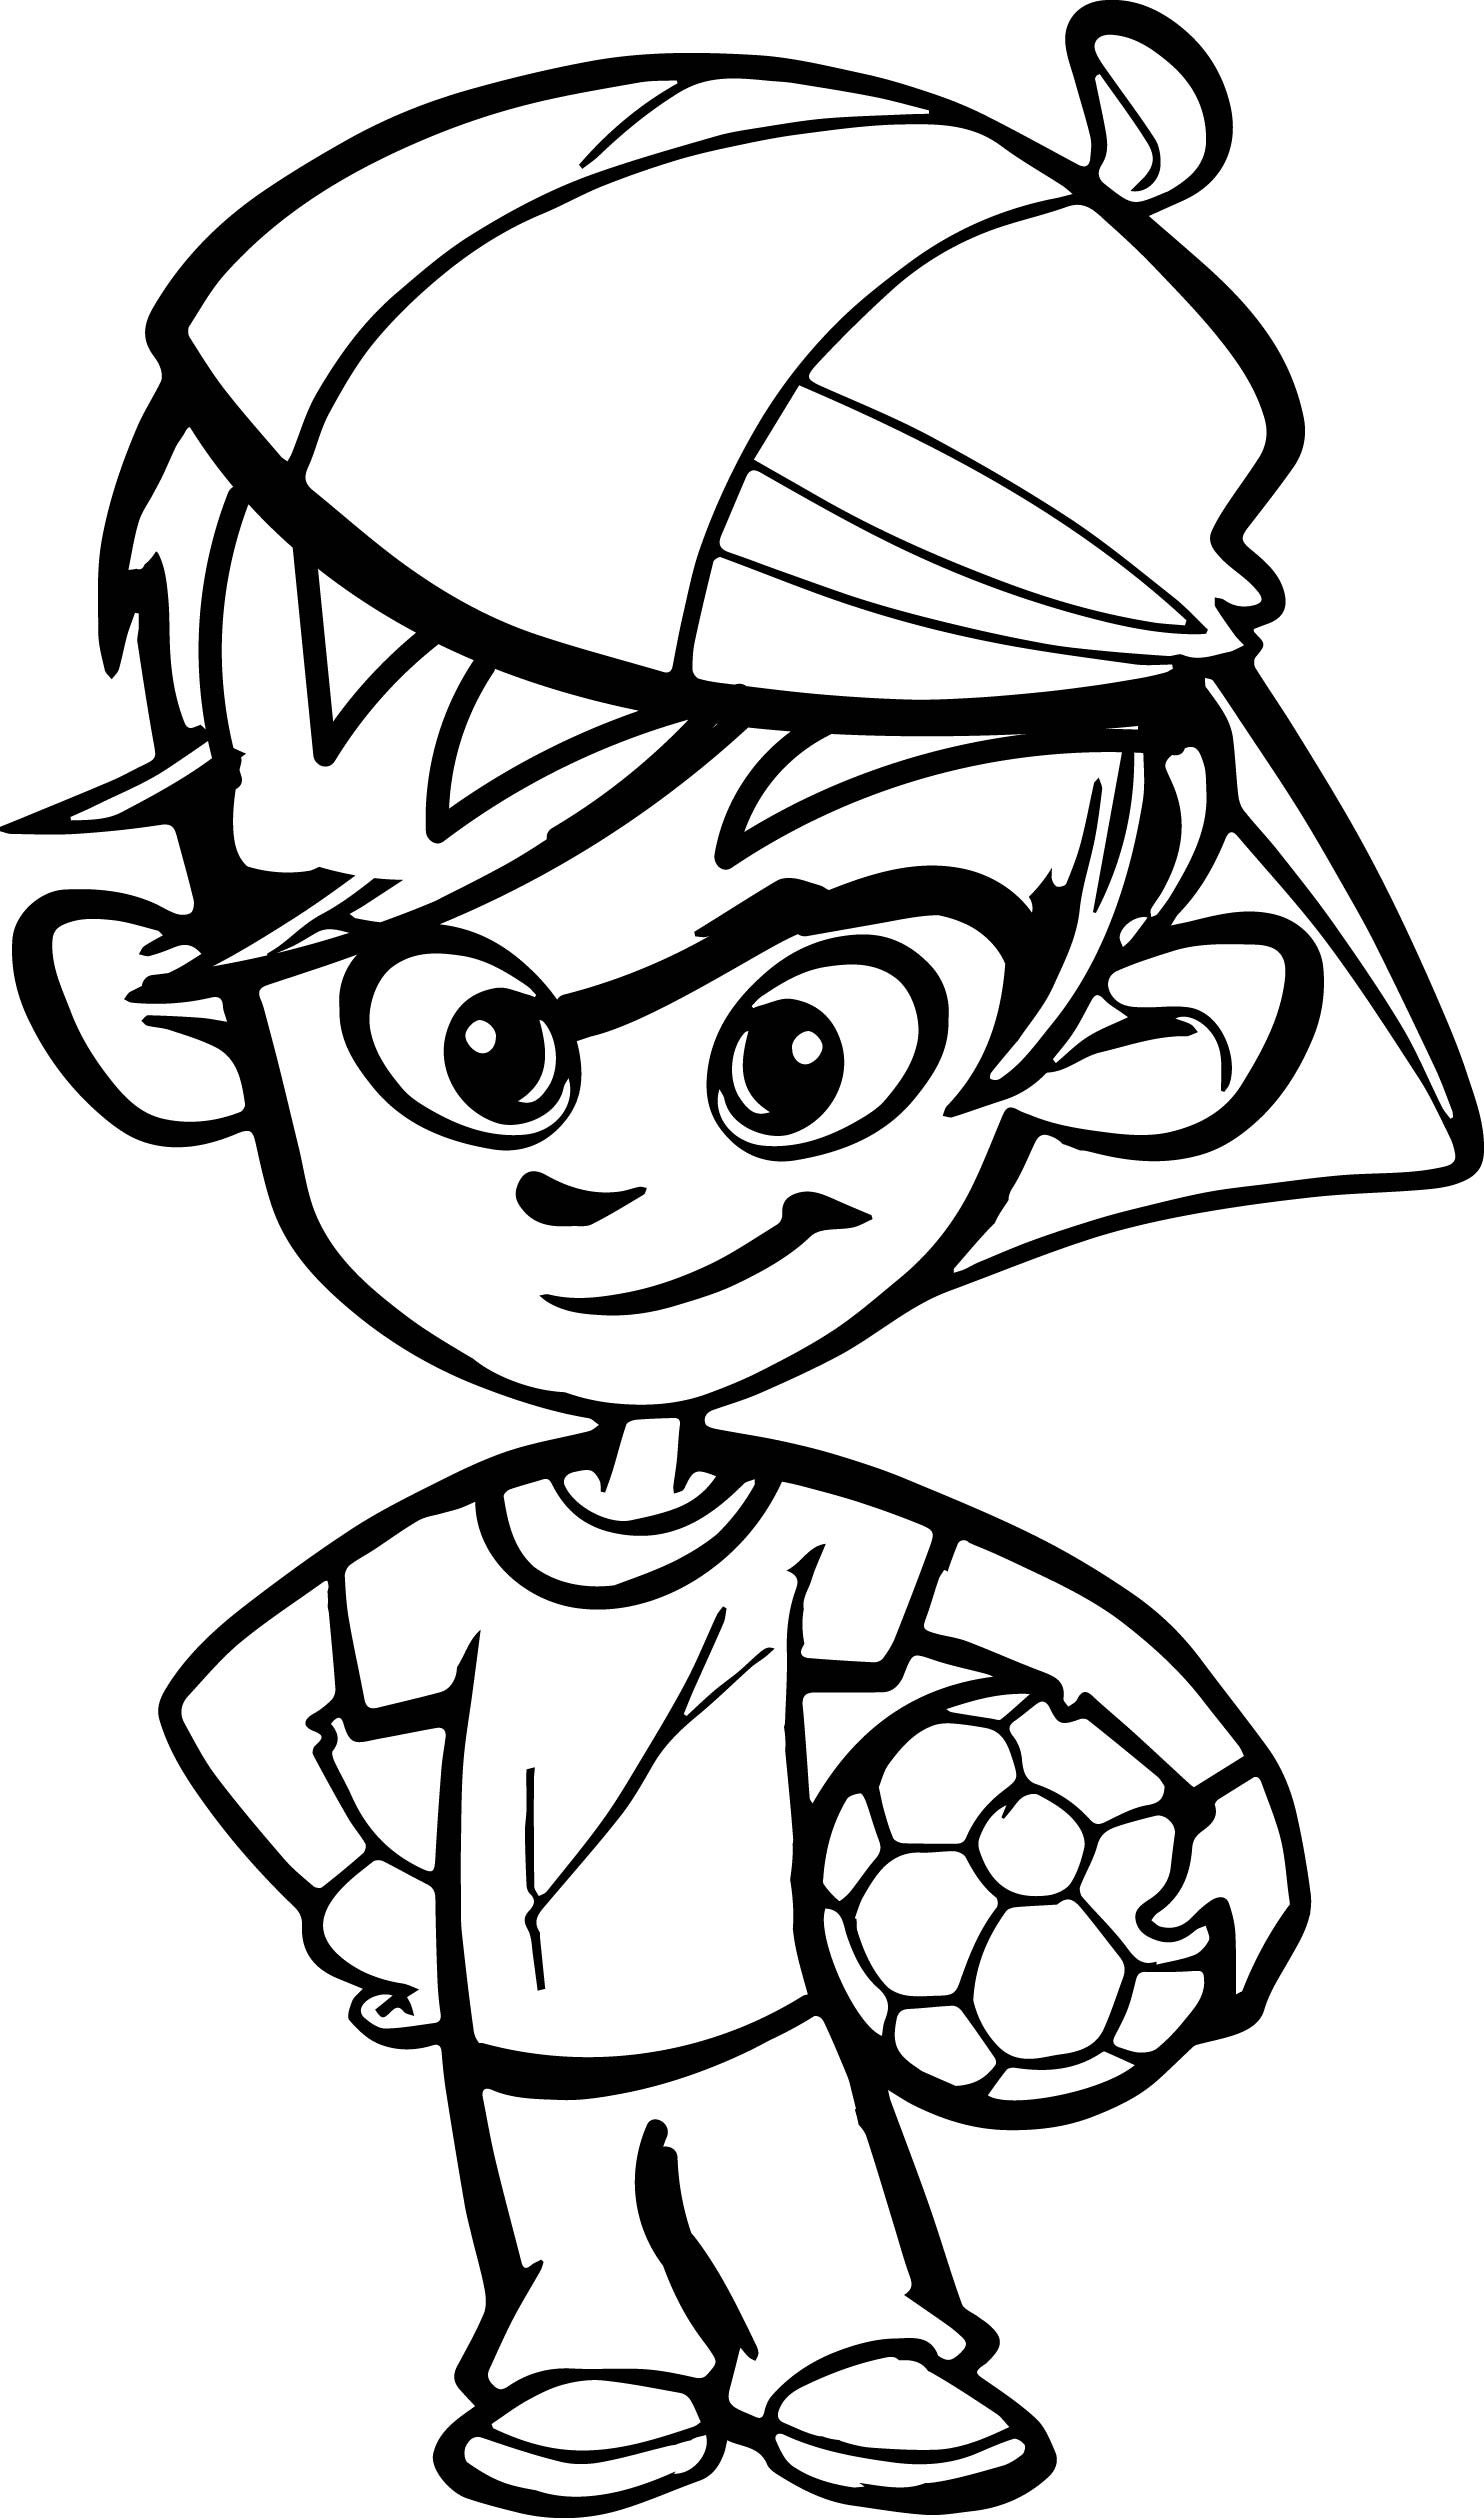 Kid Coloring Book Pages
 Soccer Player Boy Kid Coloring Page